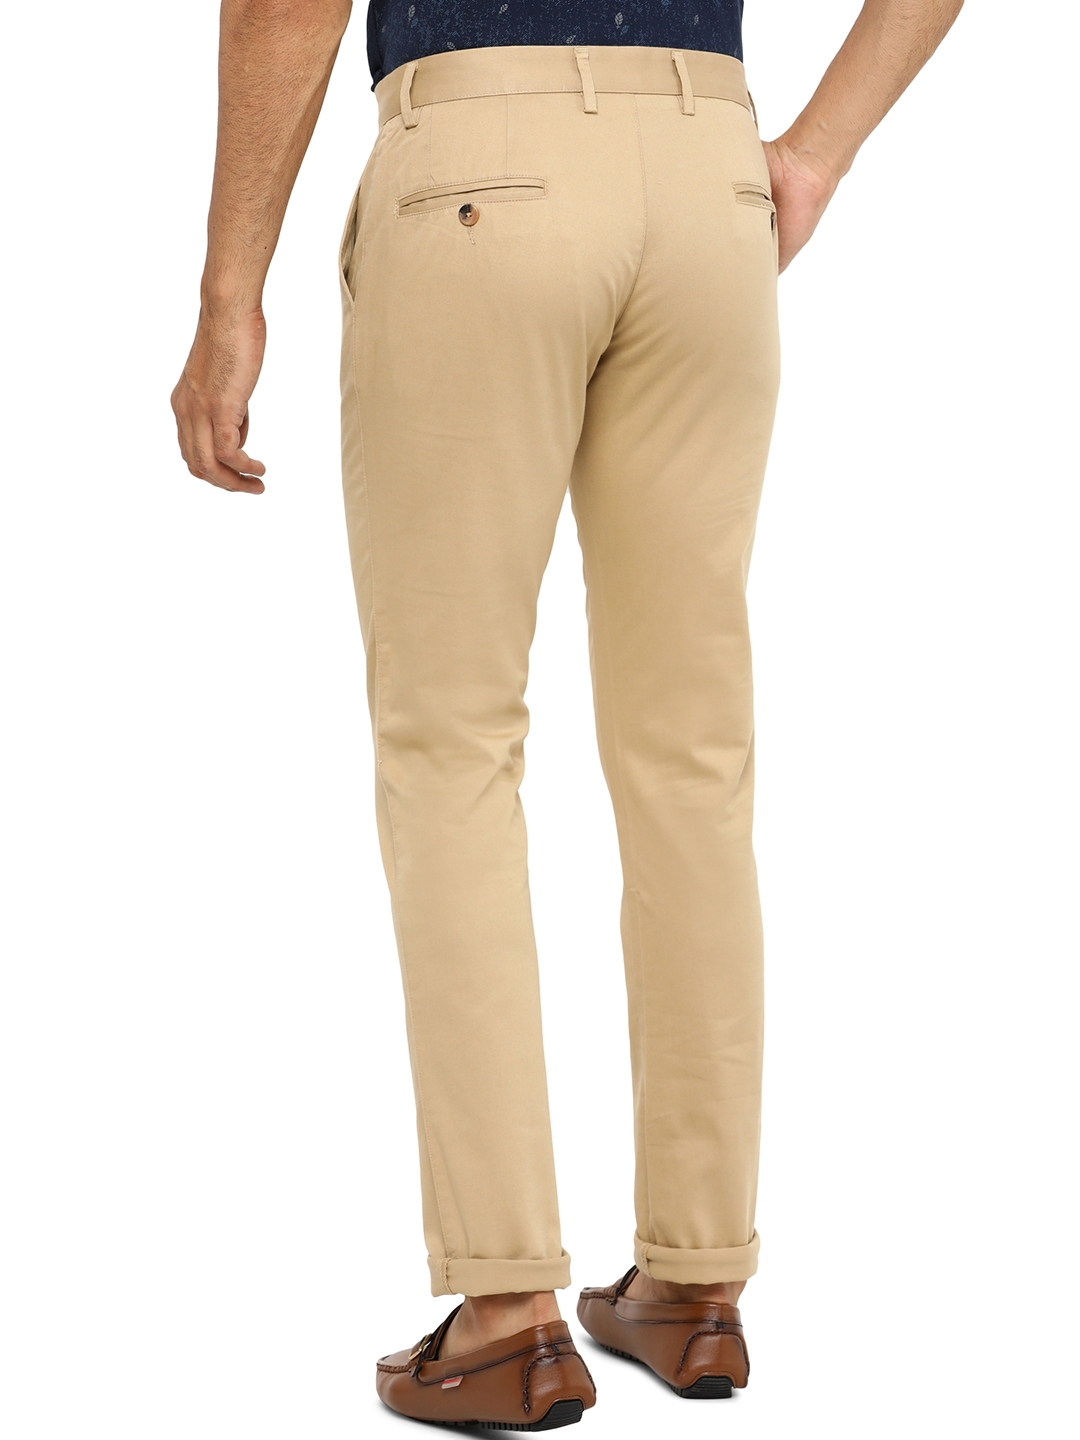 Greenfibre | Beige Solid Super Slim Fit Casual Trouser | Greenfibre 2